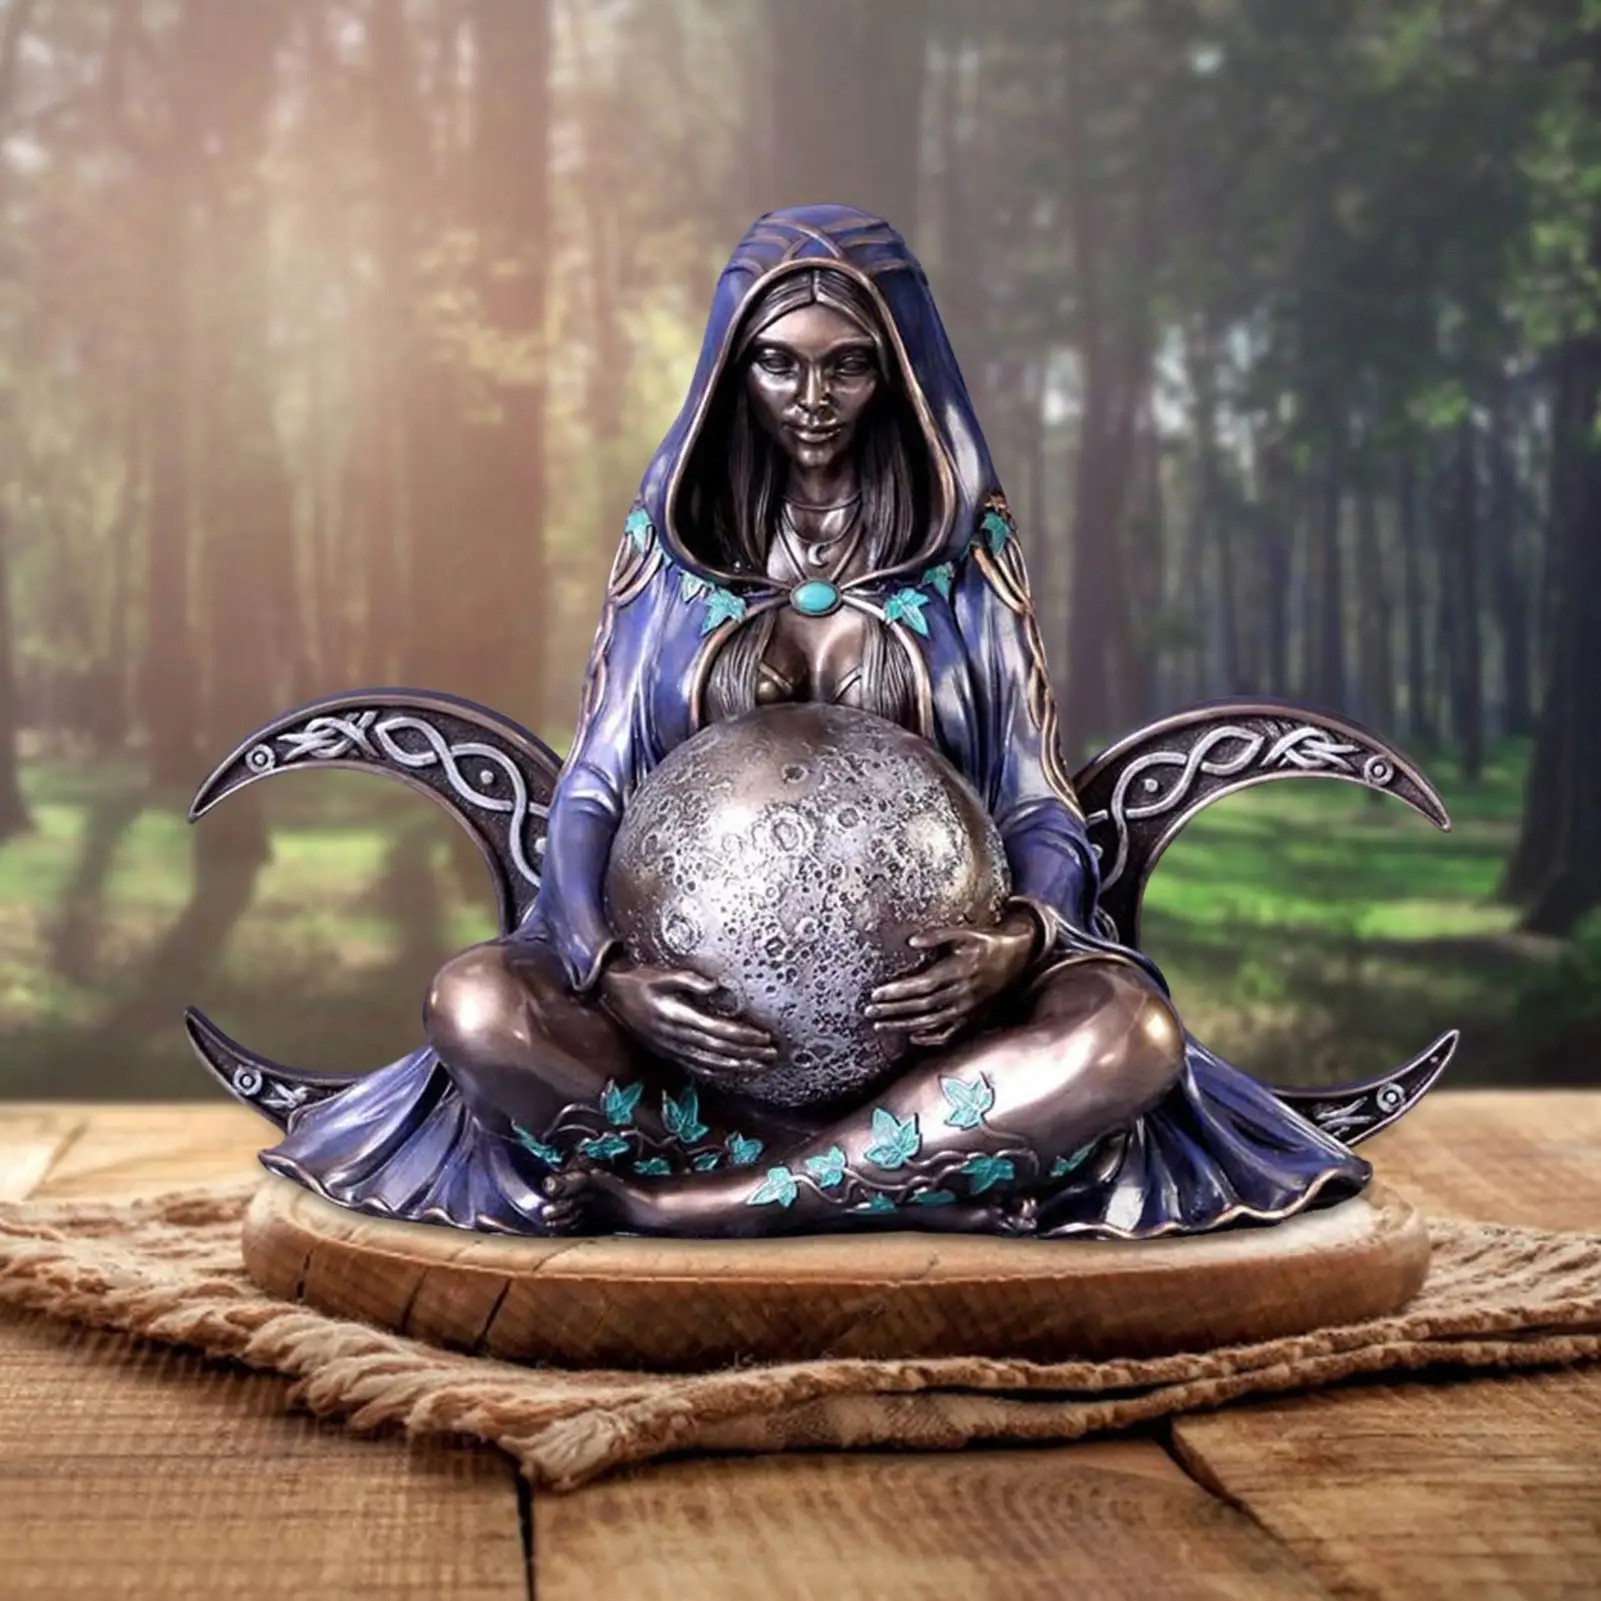 

Mother Earth Goddess Art Statue Millennial Gaia Statue Resin Crafts Sculpture Mythic Figurine Ornament Earth Day Home Decoration